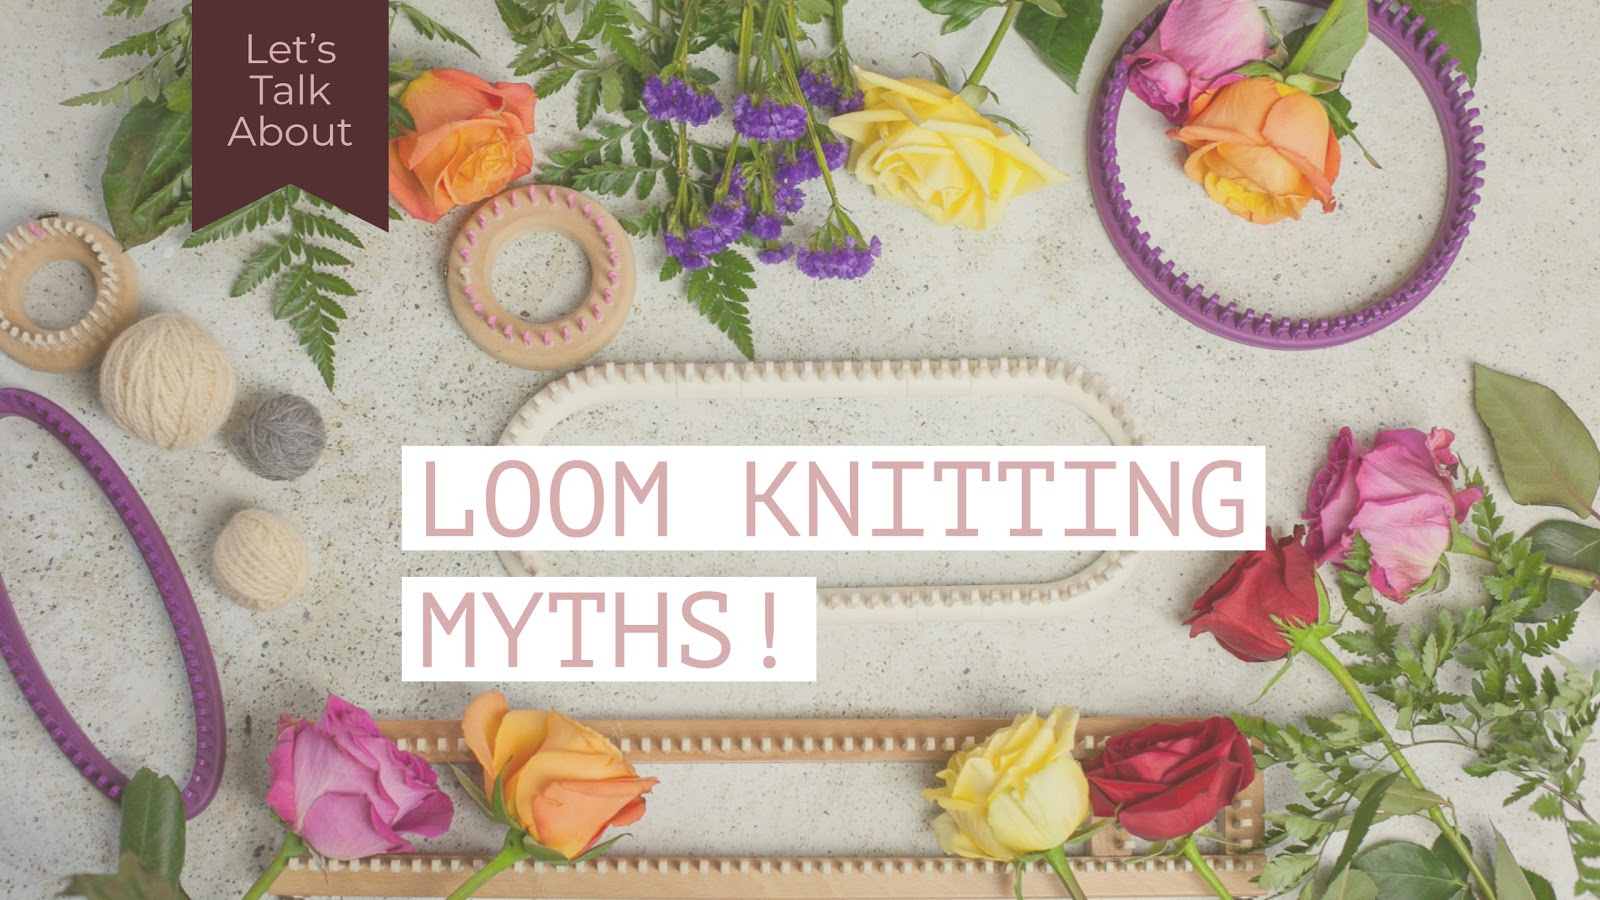 Loom Knitting by This Moment is Good!: Common Myths In Loom Knitting!